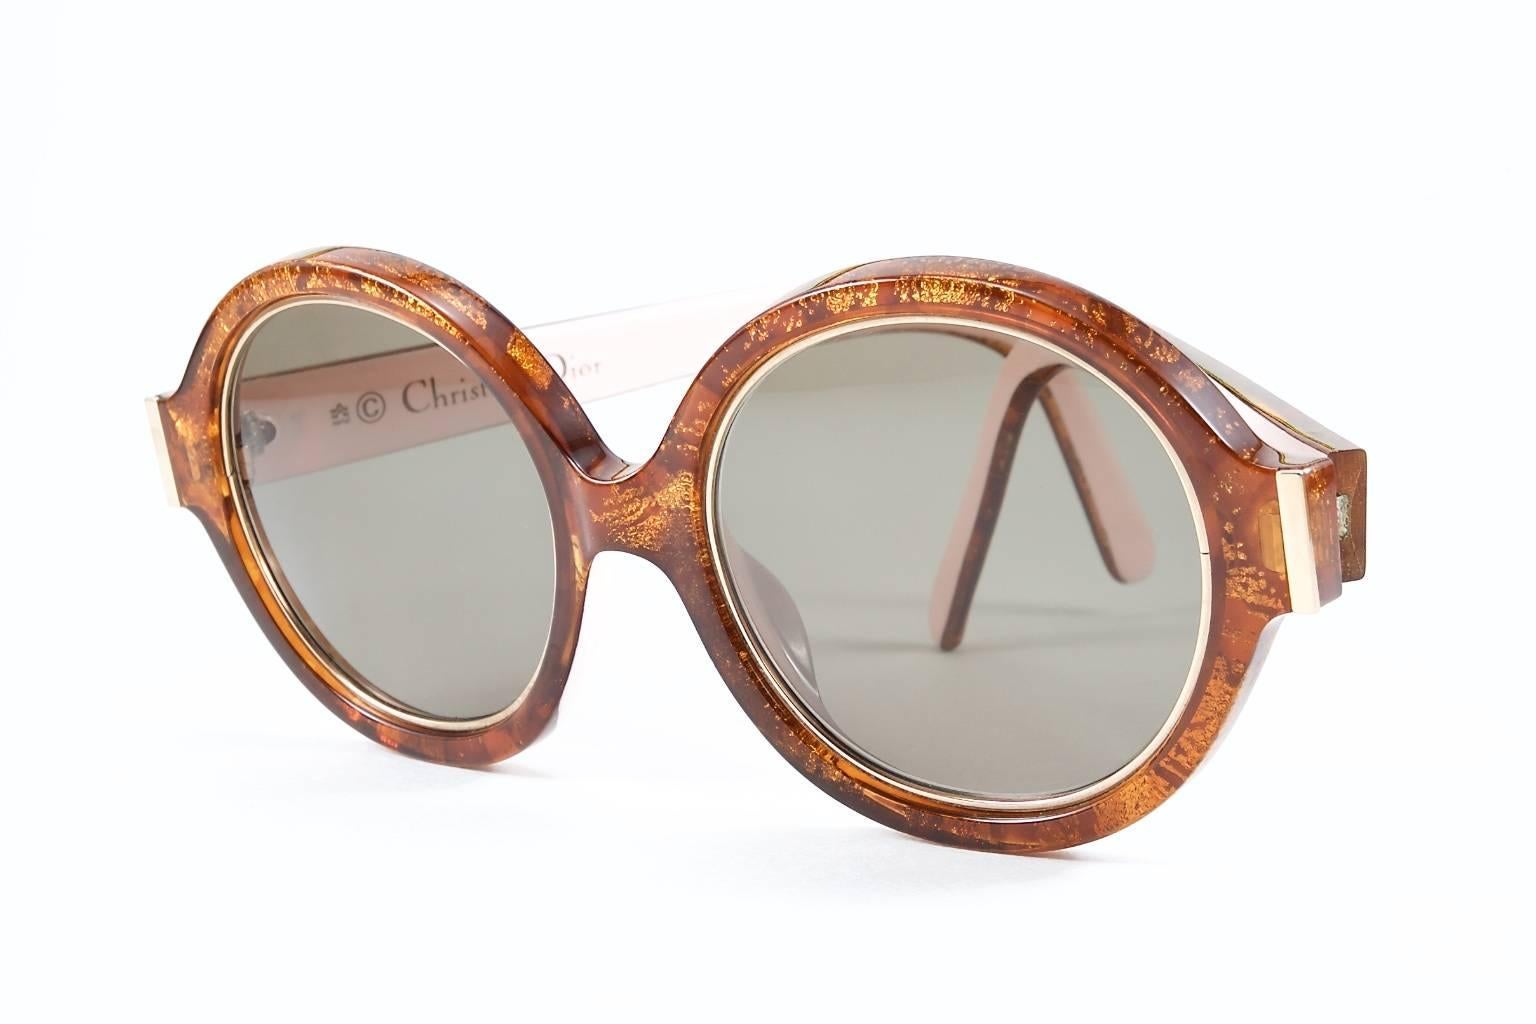 CHRISTIAN DIOR 2446 vintage sunglasses from the end of the 80s, extravagant glasses frame in high quality OPTYL-material. Sunglasses are accented with gold flex and a gold ring around the lenses. A very light and comfortable to wear, new quality